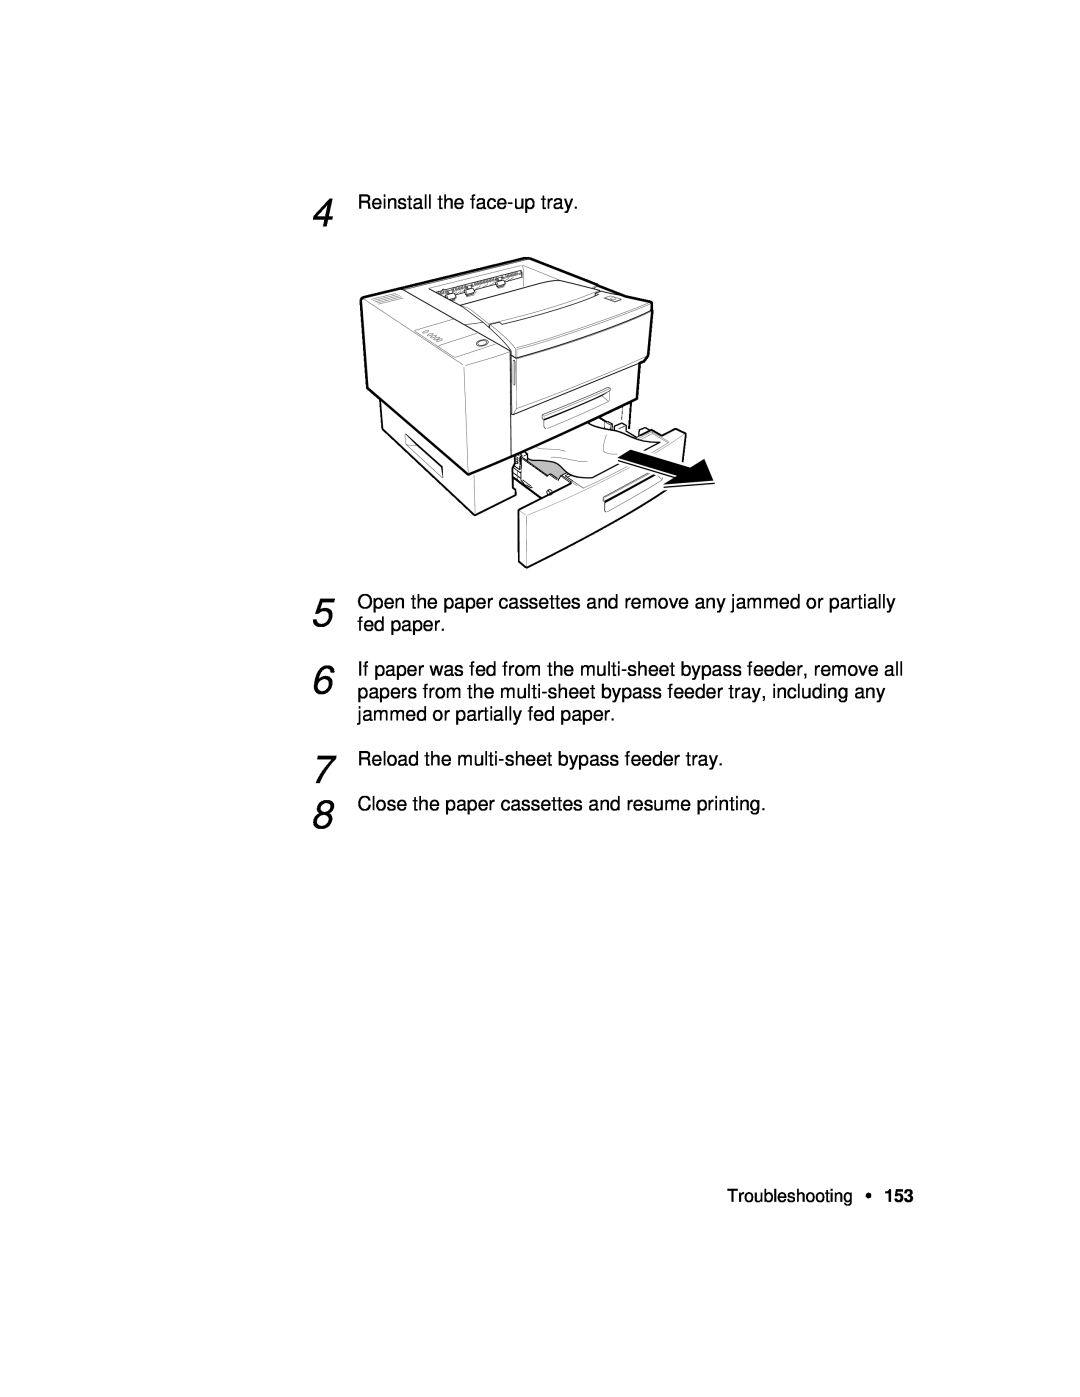 Xerox P12 manual Reinstall the face-up tray, If paper was fed from the multi-sheet bypass feeder, remove all, fed paper 